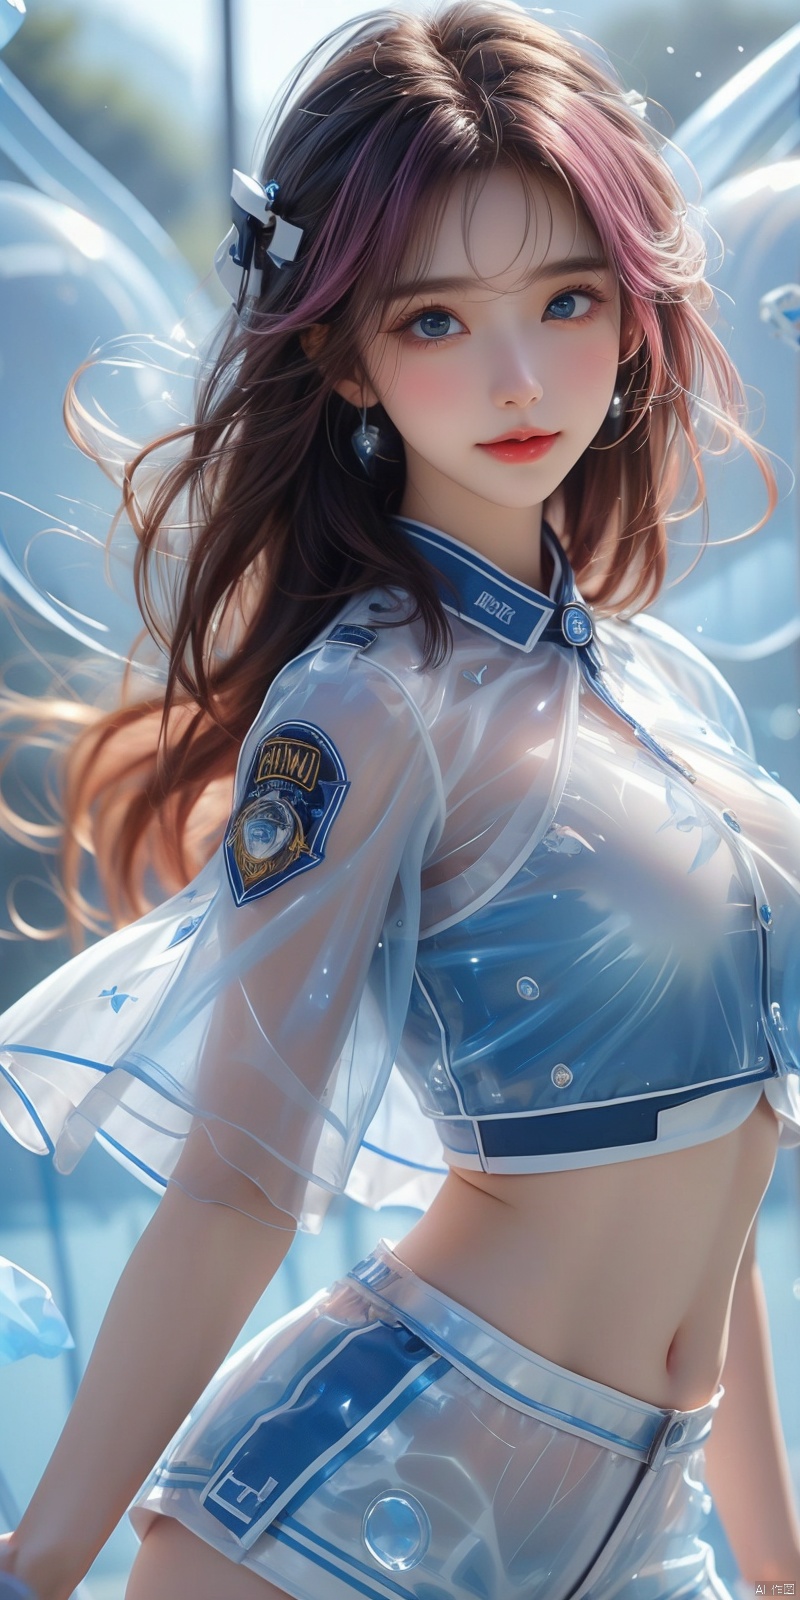  cowboy_shot, (Good structure), DSLR Quality,Depth of field ,looking_at_viewer,Dynamic pose, , kind smile,,
, ,High quality, masterpiece, 1Girl, Earstuds, blue eyes,Earstuds, blue eyes, black hair, (translucent white police uniform: 1.5), navel exposed, (translucent shorts: 1.3), thigh exposed, (supermodel pose),smile,(solo),（Different postures）,Pink hair,(Perfect hand lines),, 1 girl, , , linyuner,kind snile,looking_at_viewer,perfect body, solo